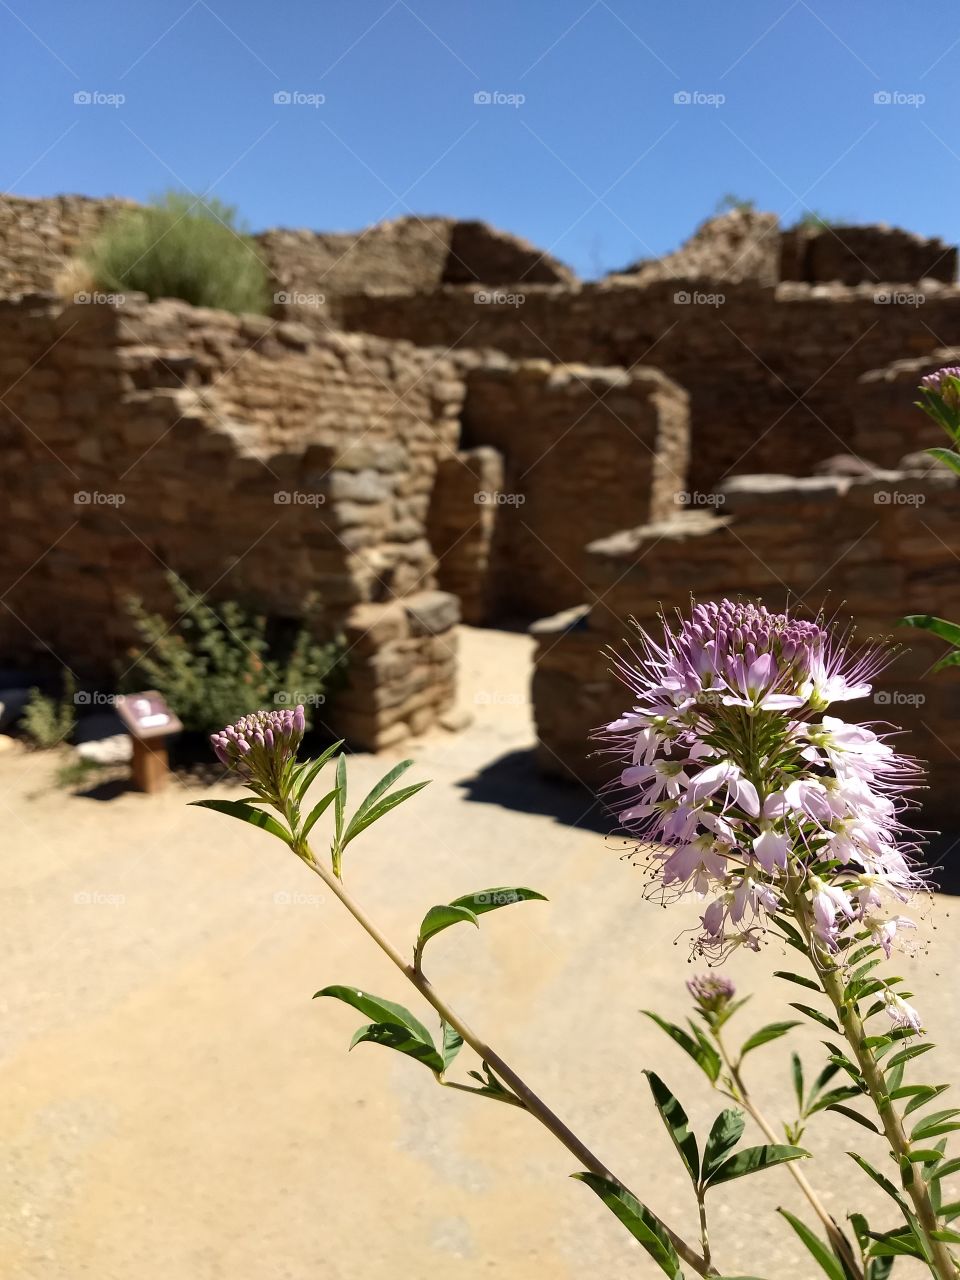 Flowers grow near Indian ruins in New Mexico.